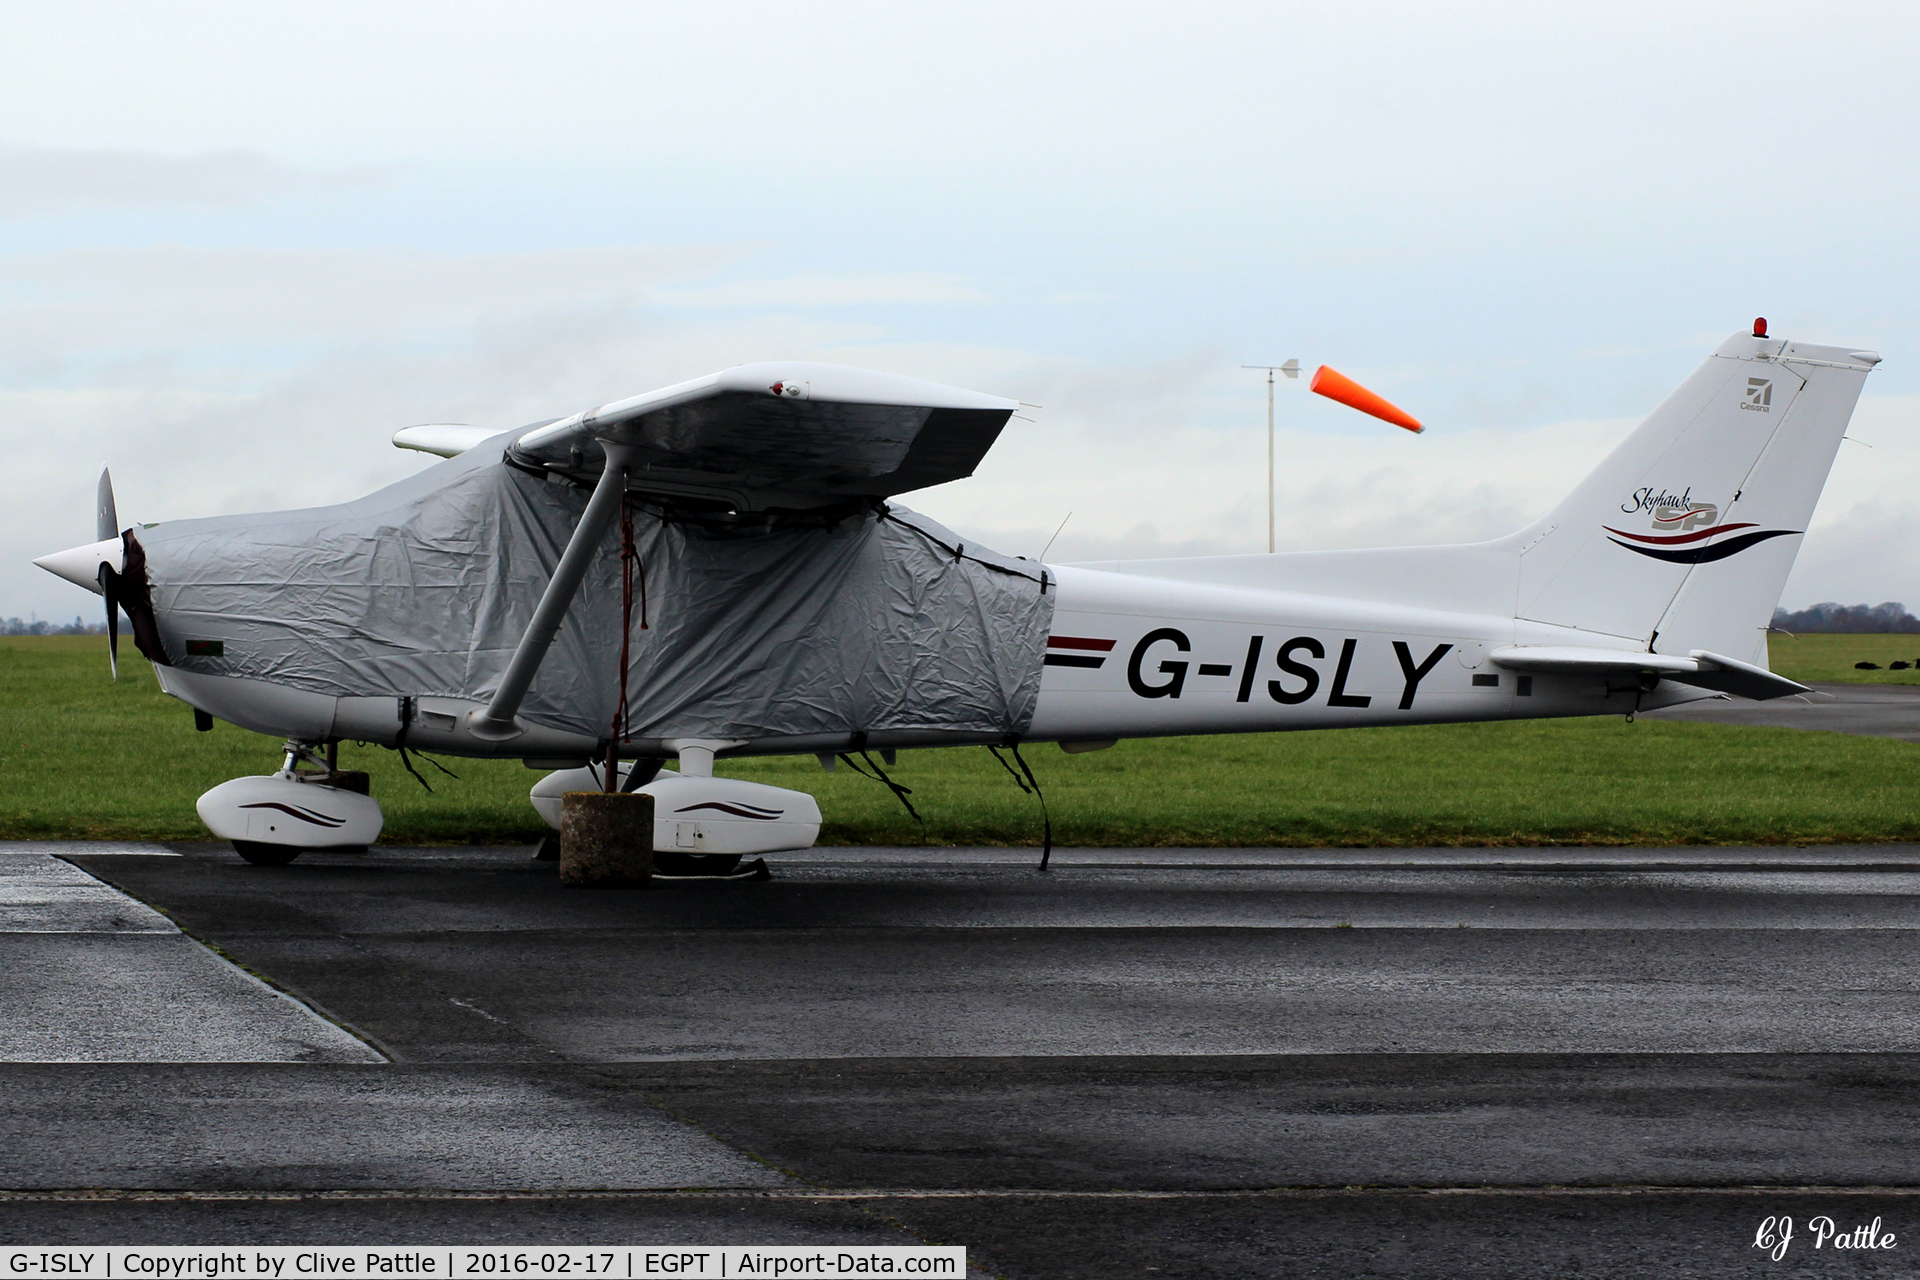 G-ISLY, 1999 Cessna 172S C/N 172S-8152, A new aircraft for Airport-Data - Parked up at Perth EGPT - ex N952SP